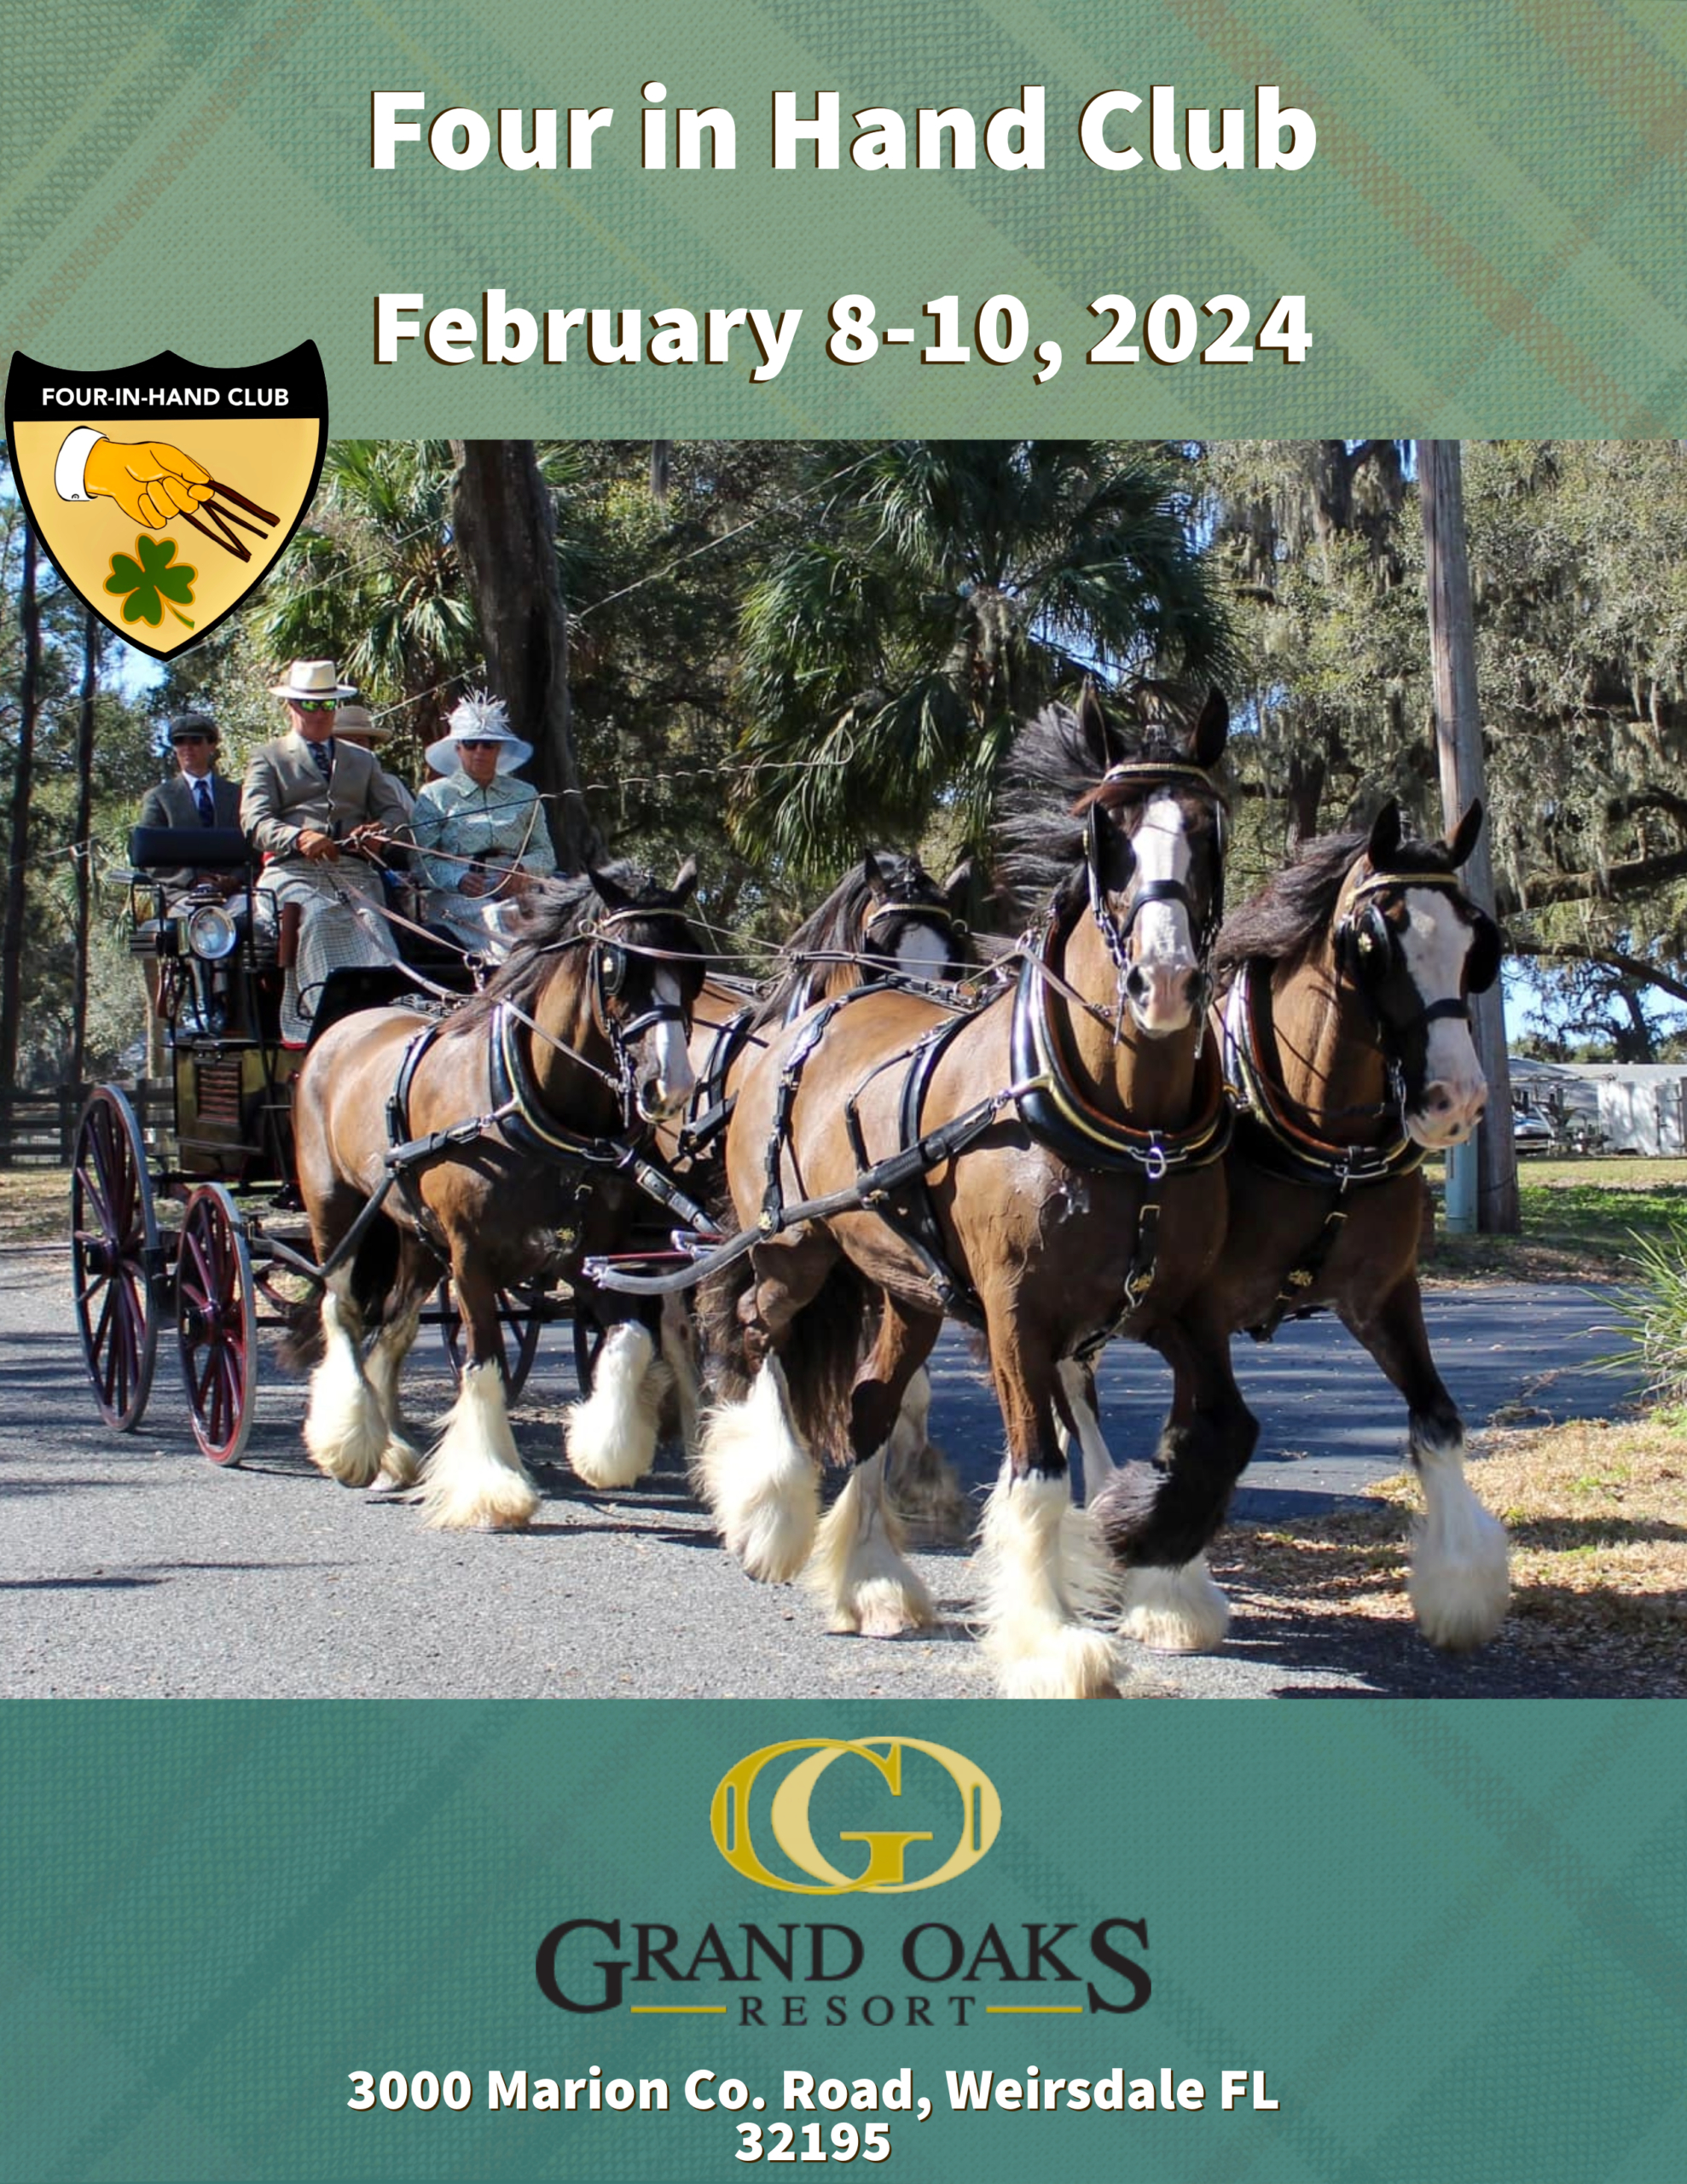 four in hand club carriage driving at the Grand Oaks Resort